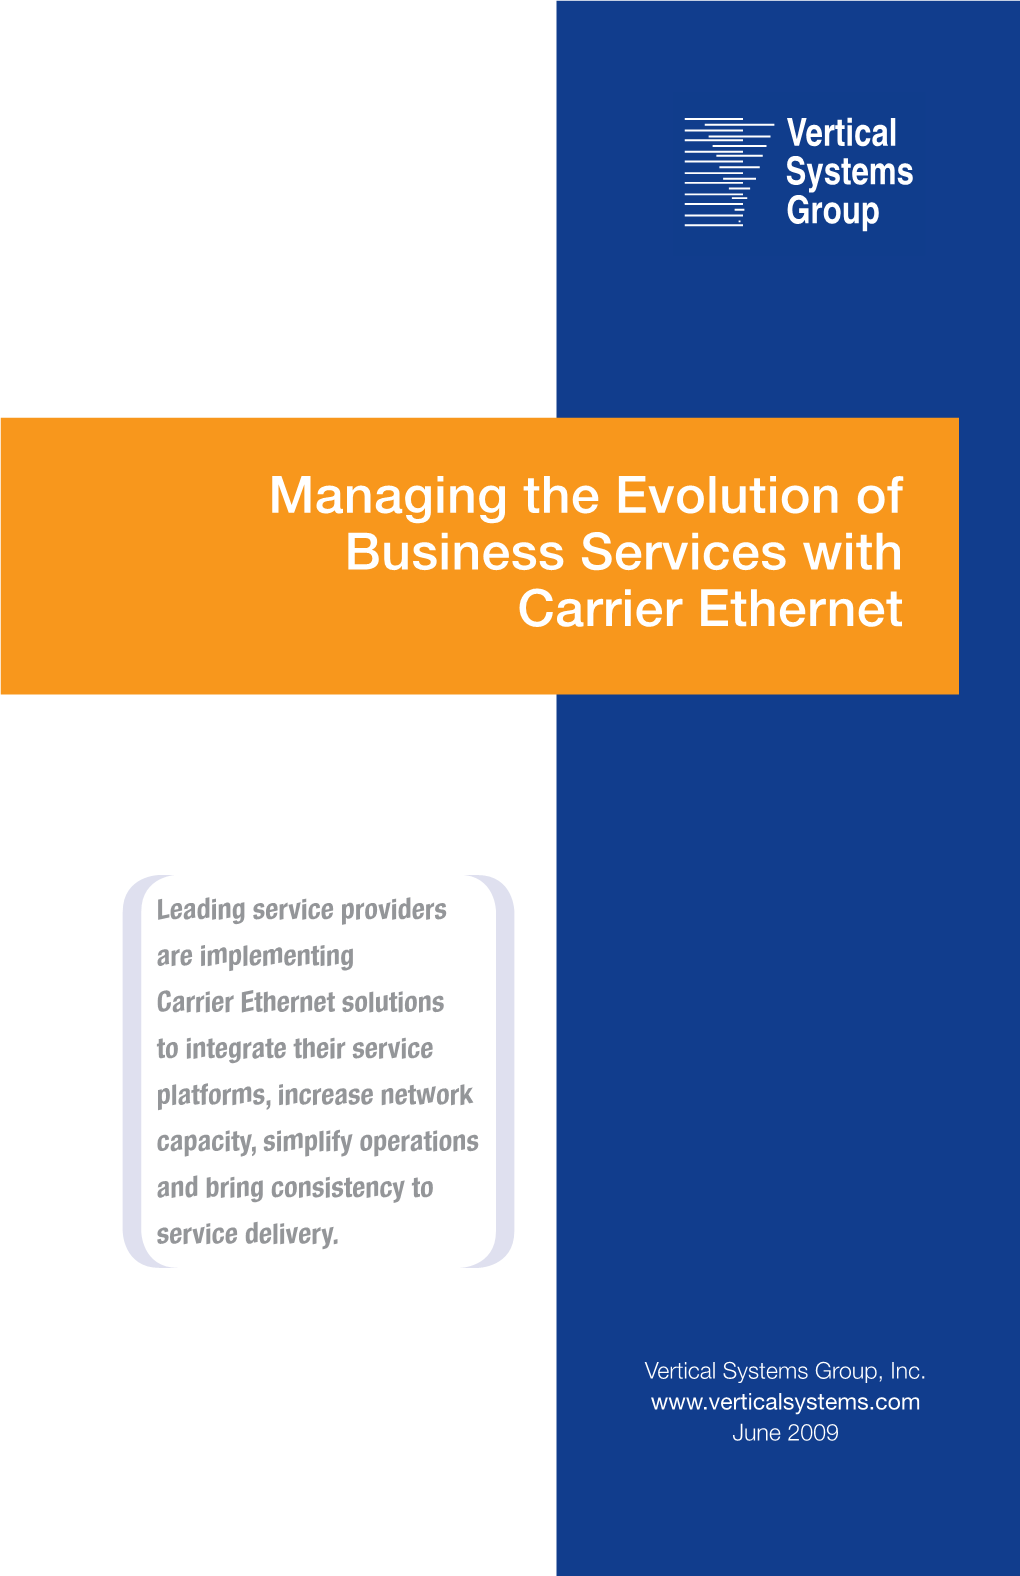 Managing the Evolution of Business Services with Carrier Ethernet